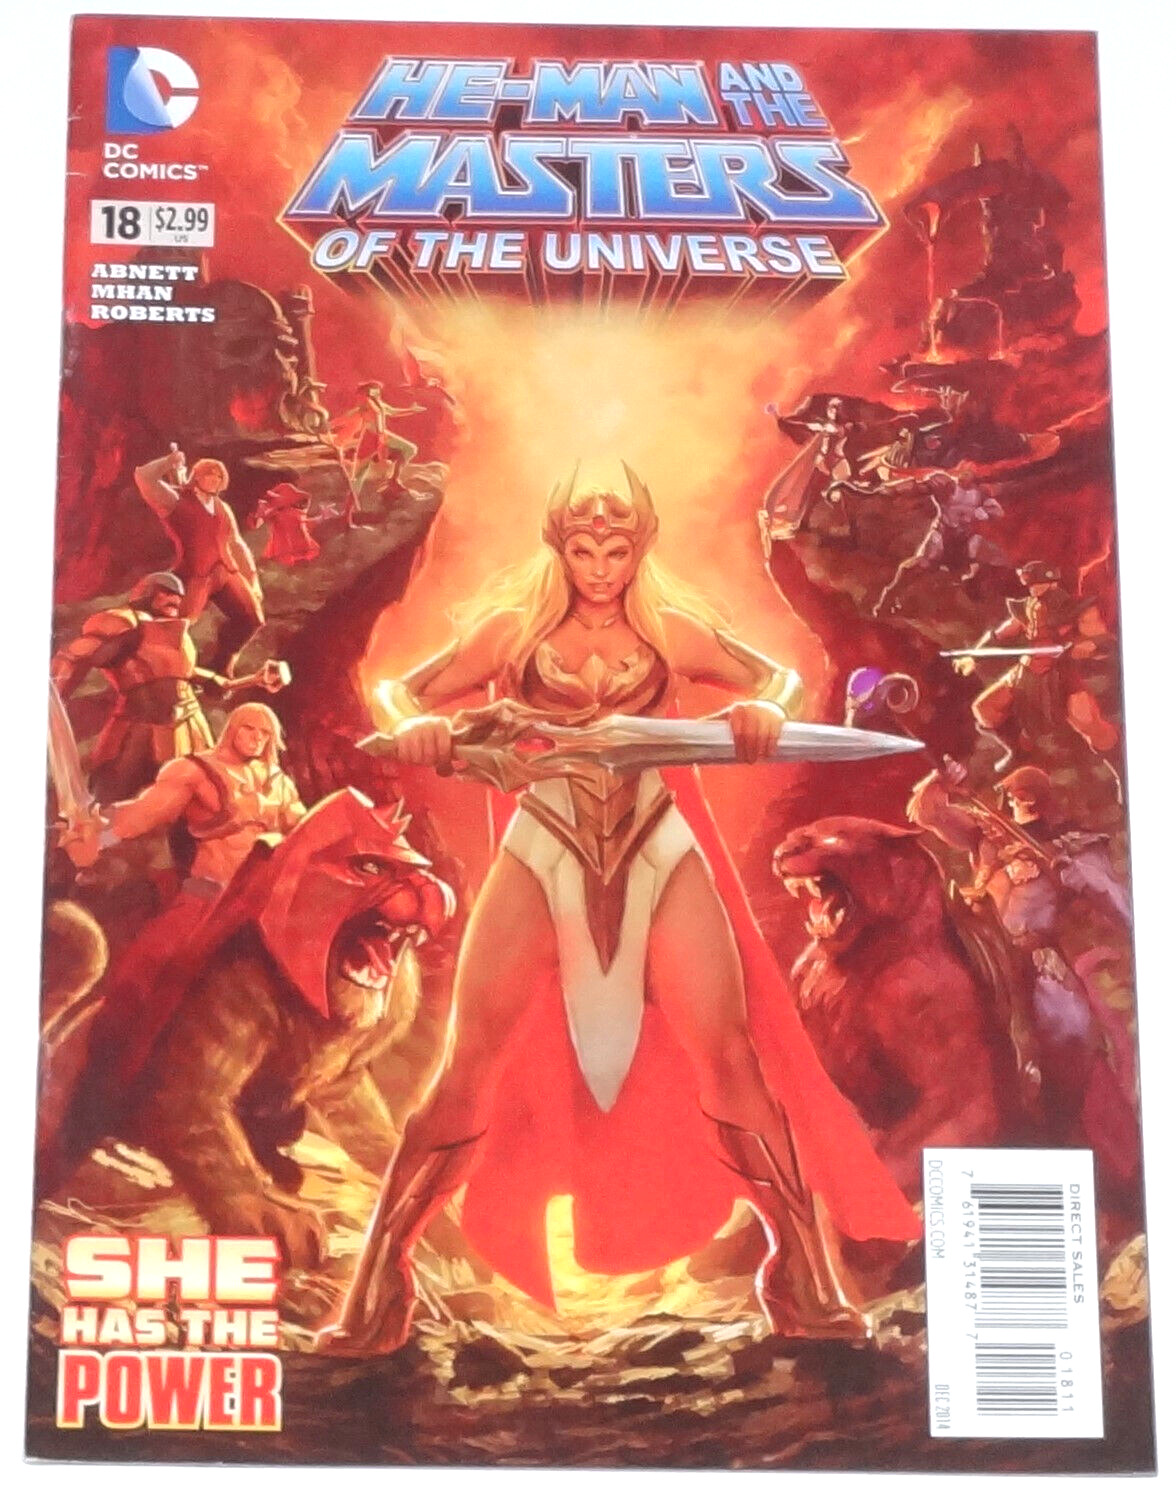 2014 DC COMICS HE-MAN AND THE MASTERS OF THE UNIVERSE #18 1st APPEARANCE SHE-RA